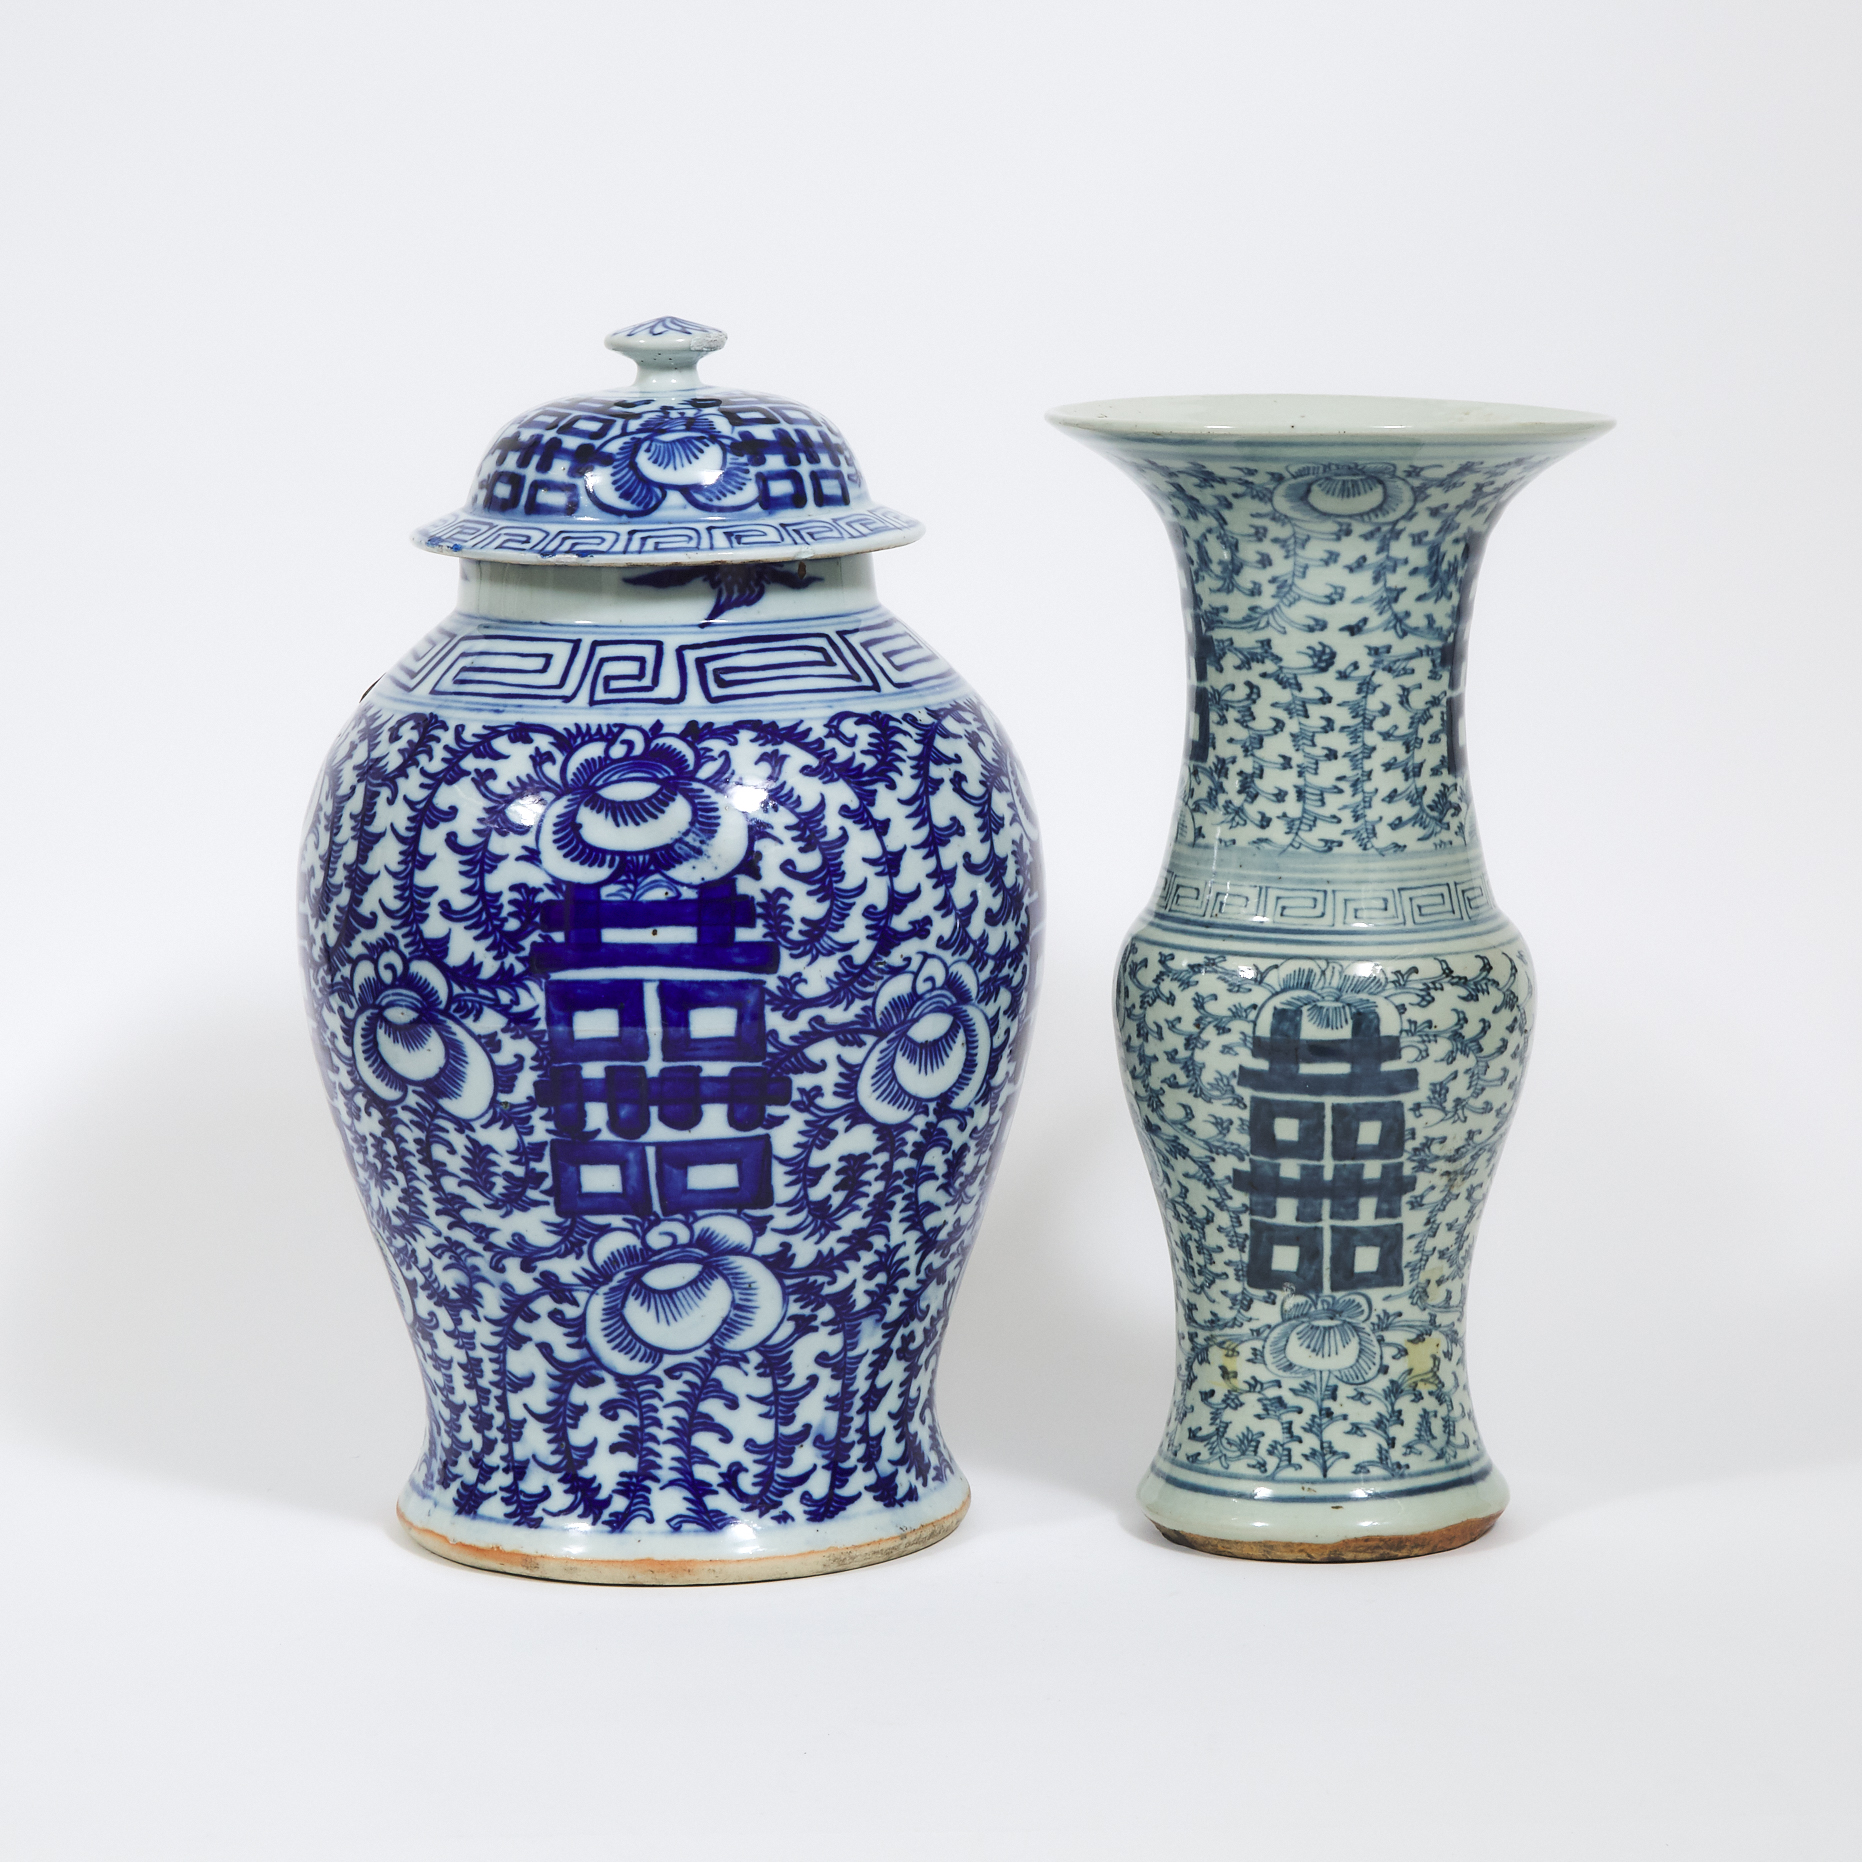 Two Blue and White 'Double Happiness' Vases, Late Qing Dynasty